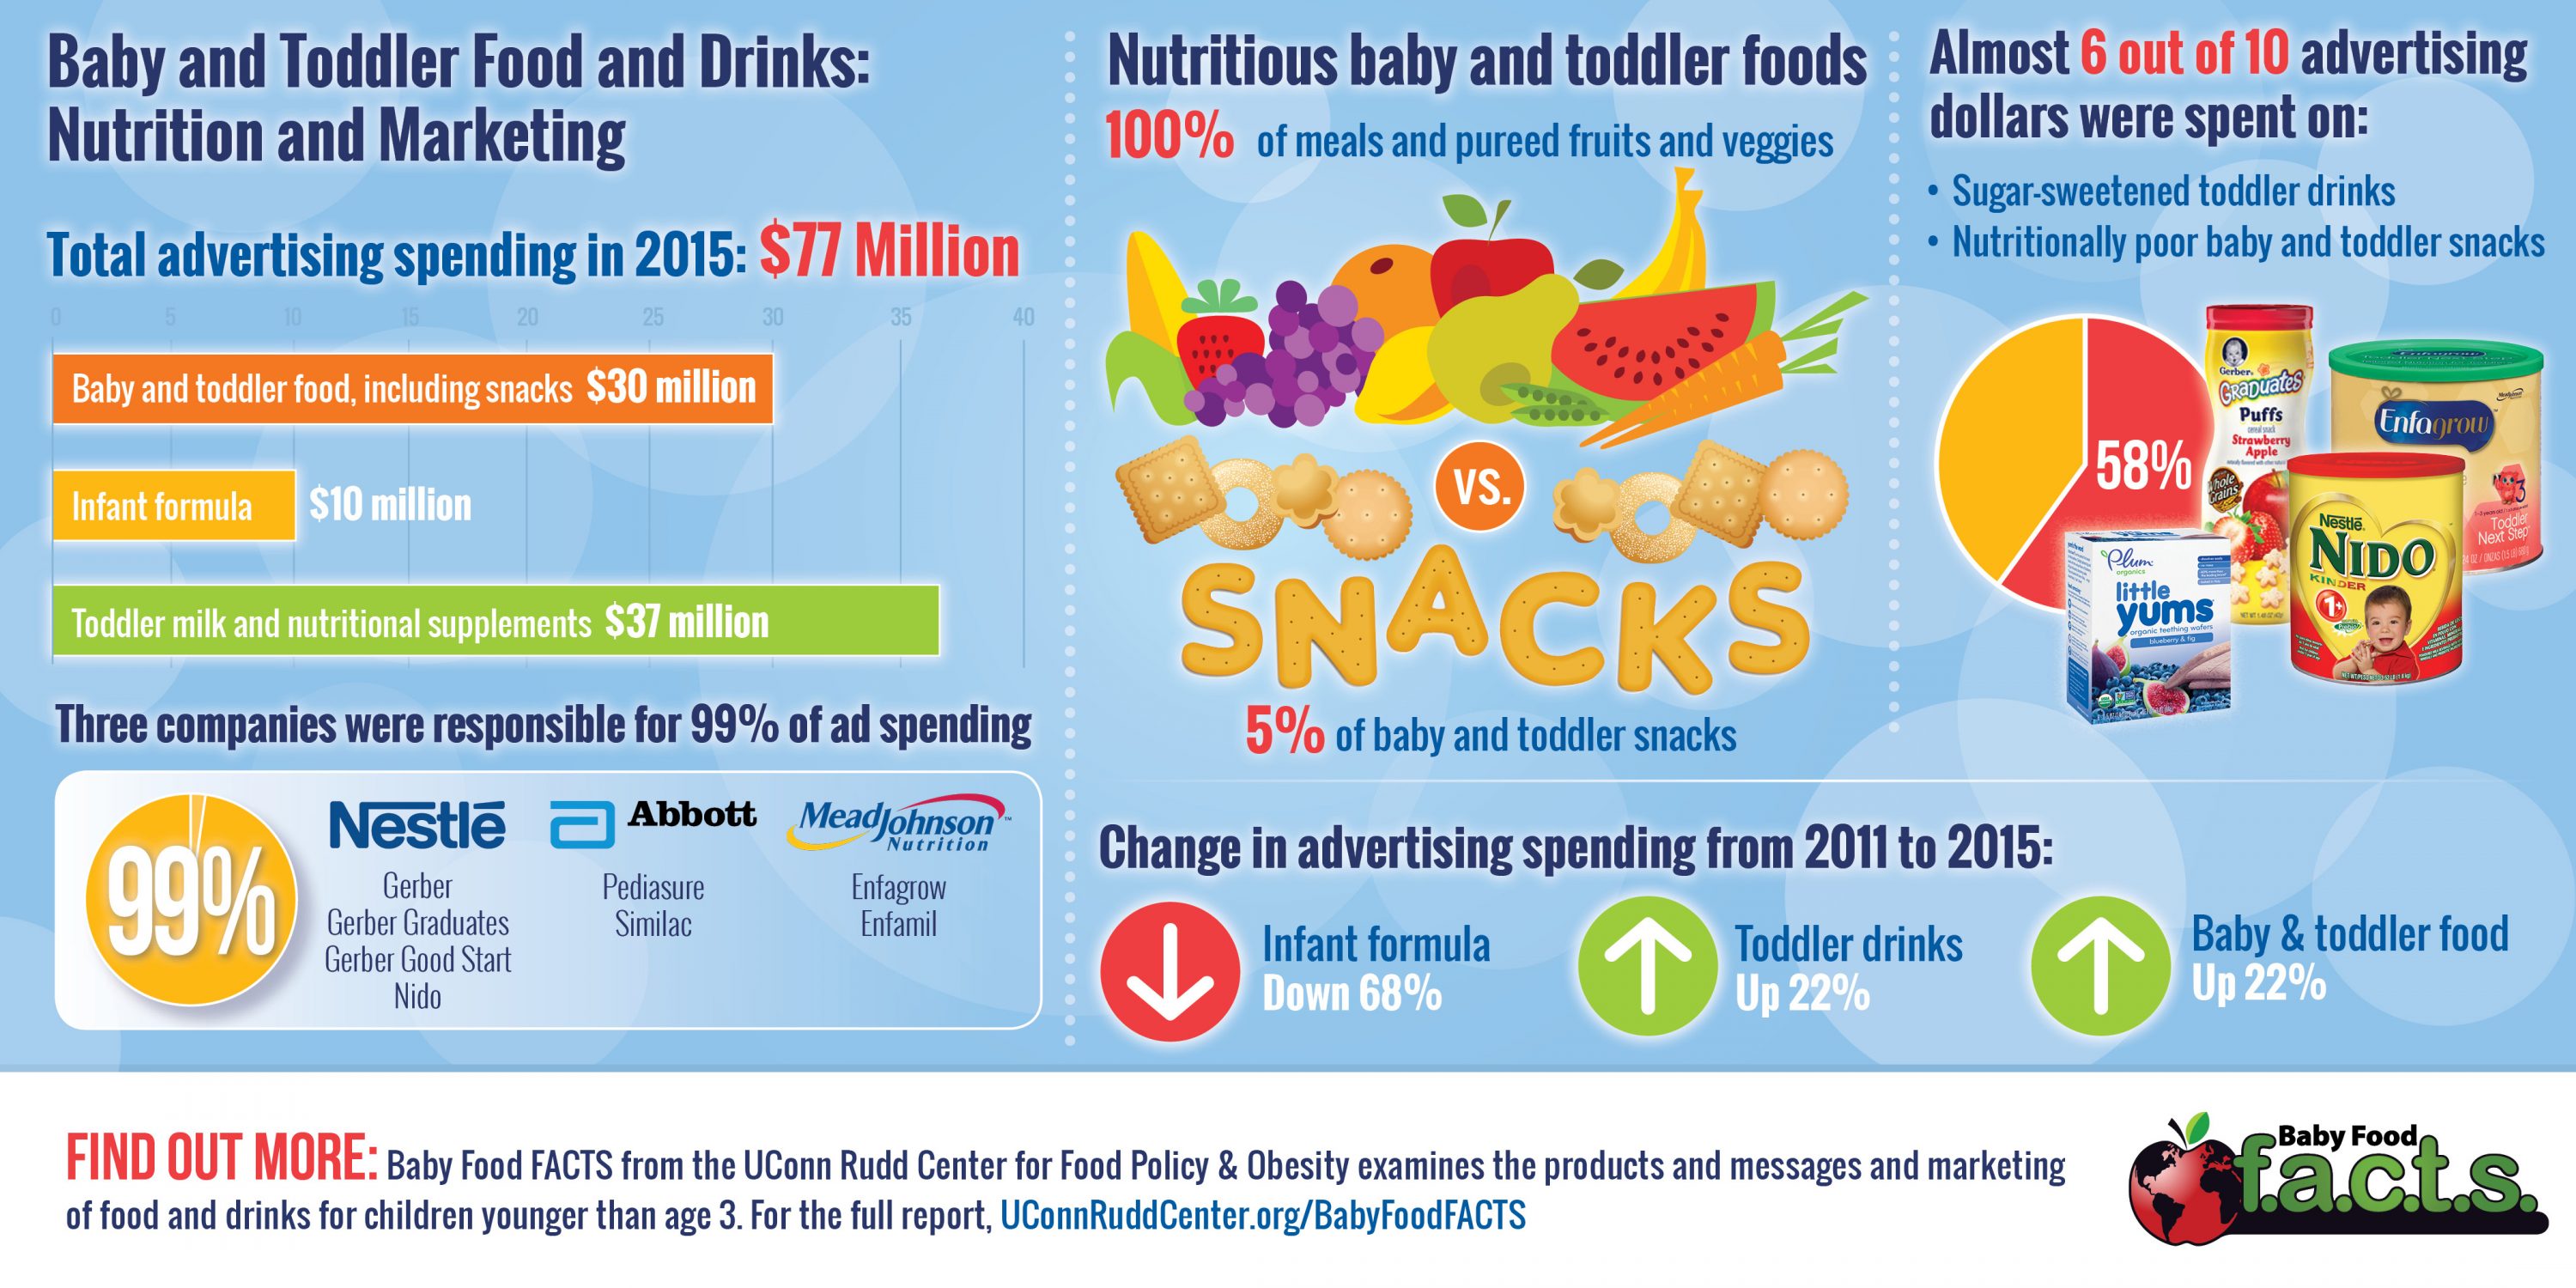 Baby and Toddler Food and Drinks: Nutrition and Marketing. (UConn Rudd Center Illustration)